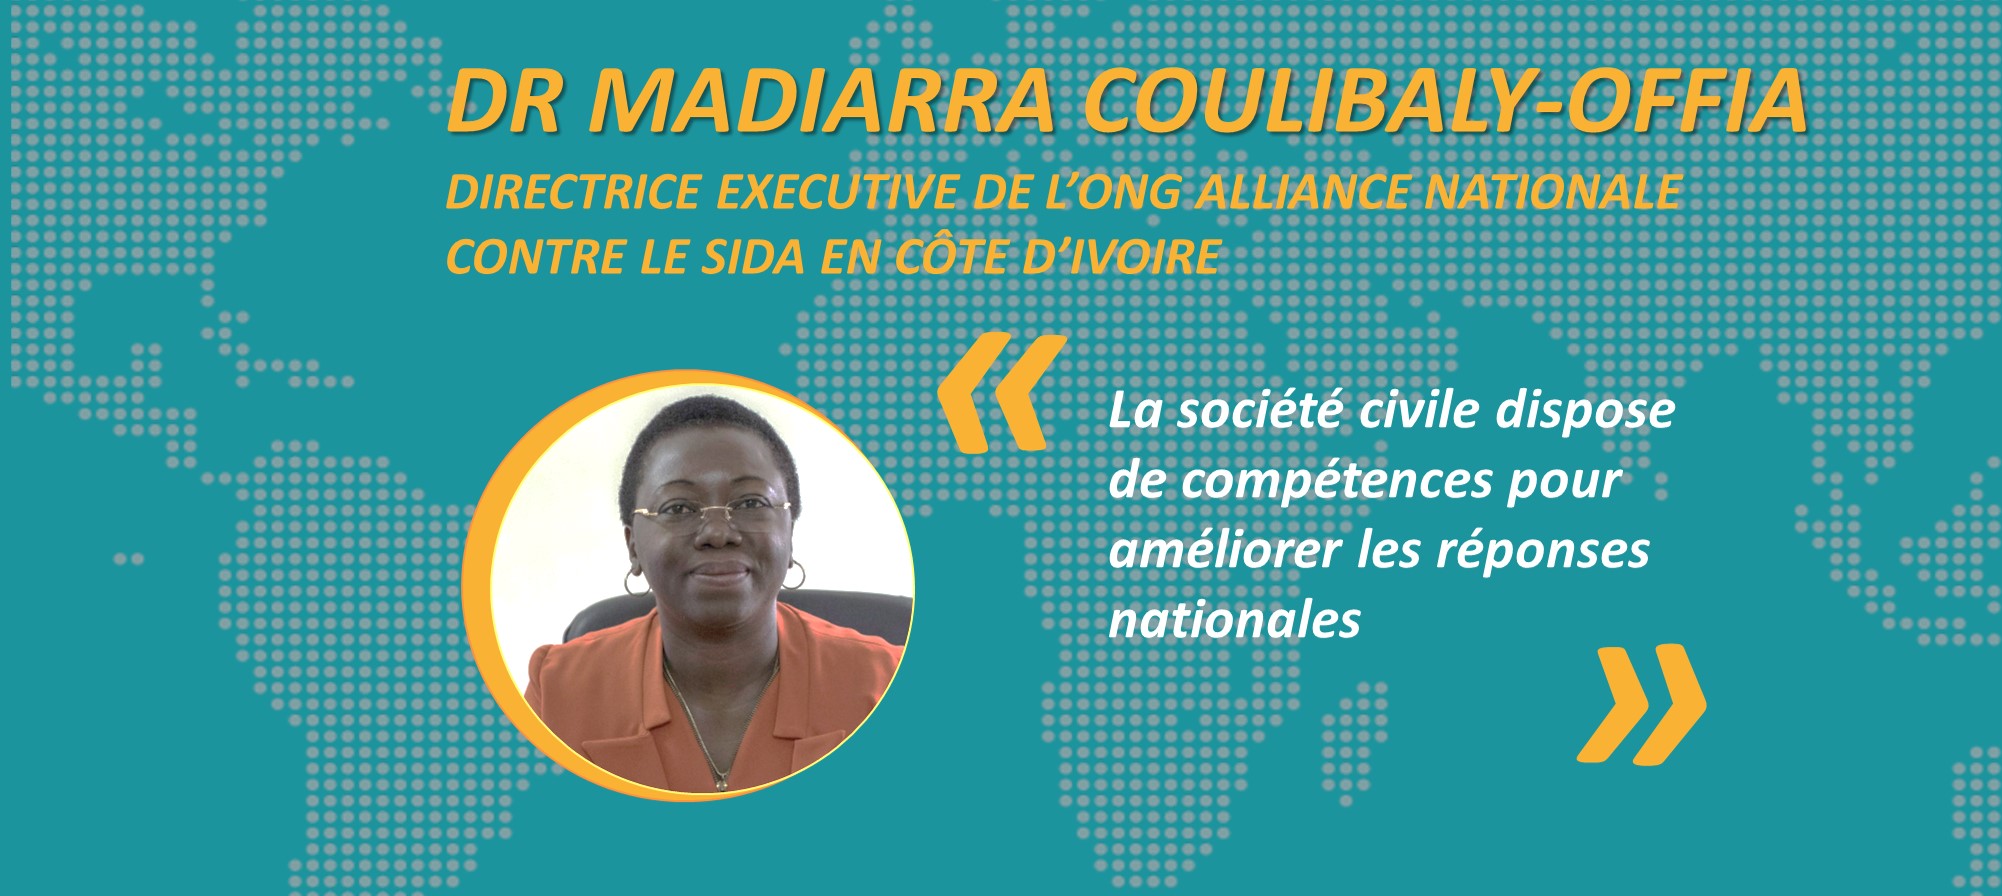 Dr Madiarra Coulibaly